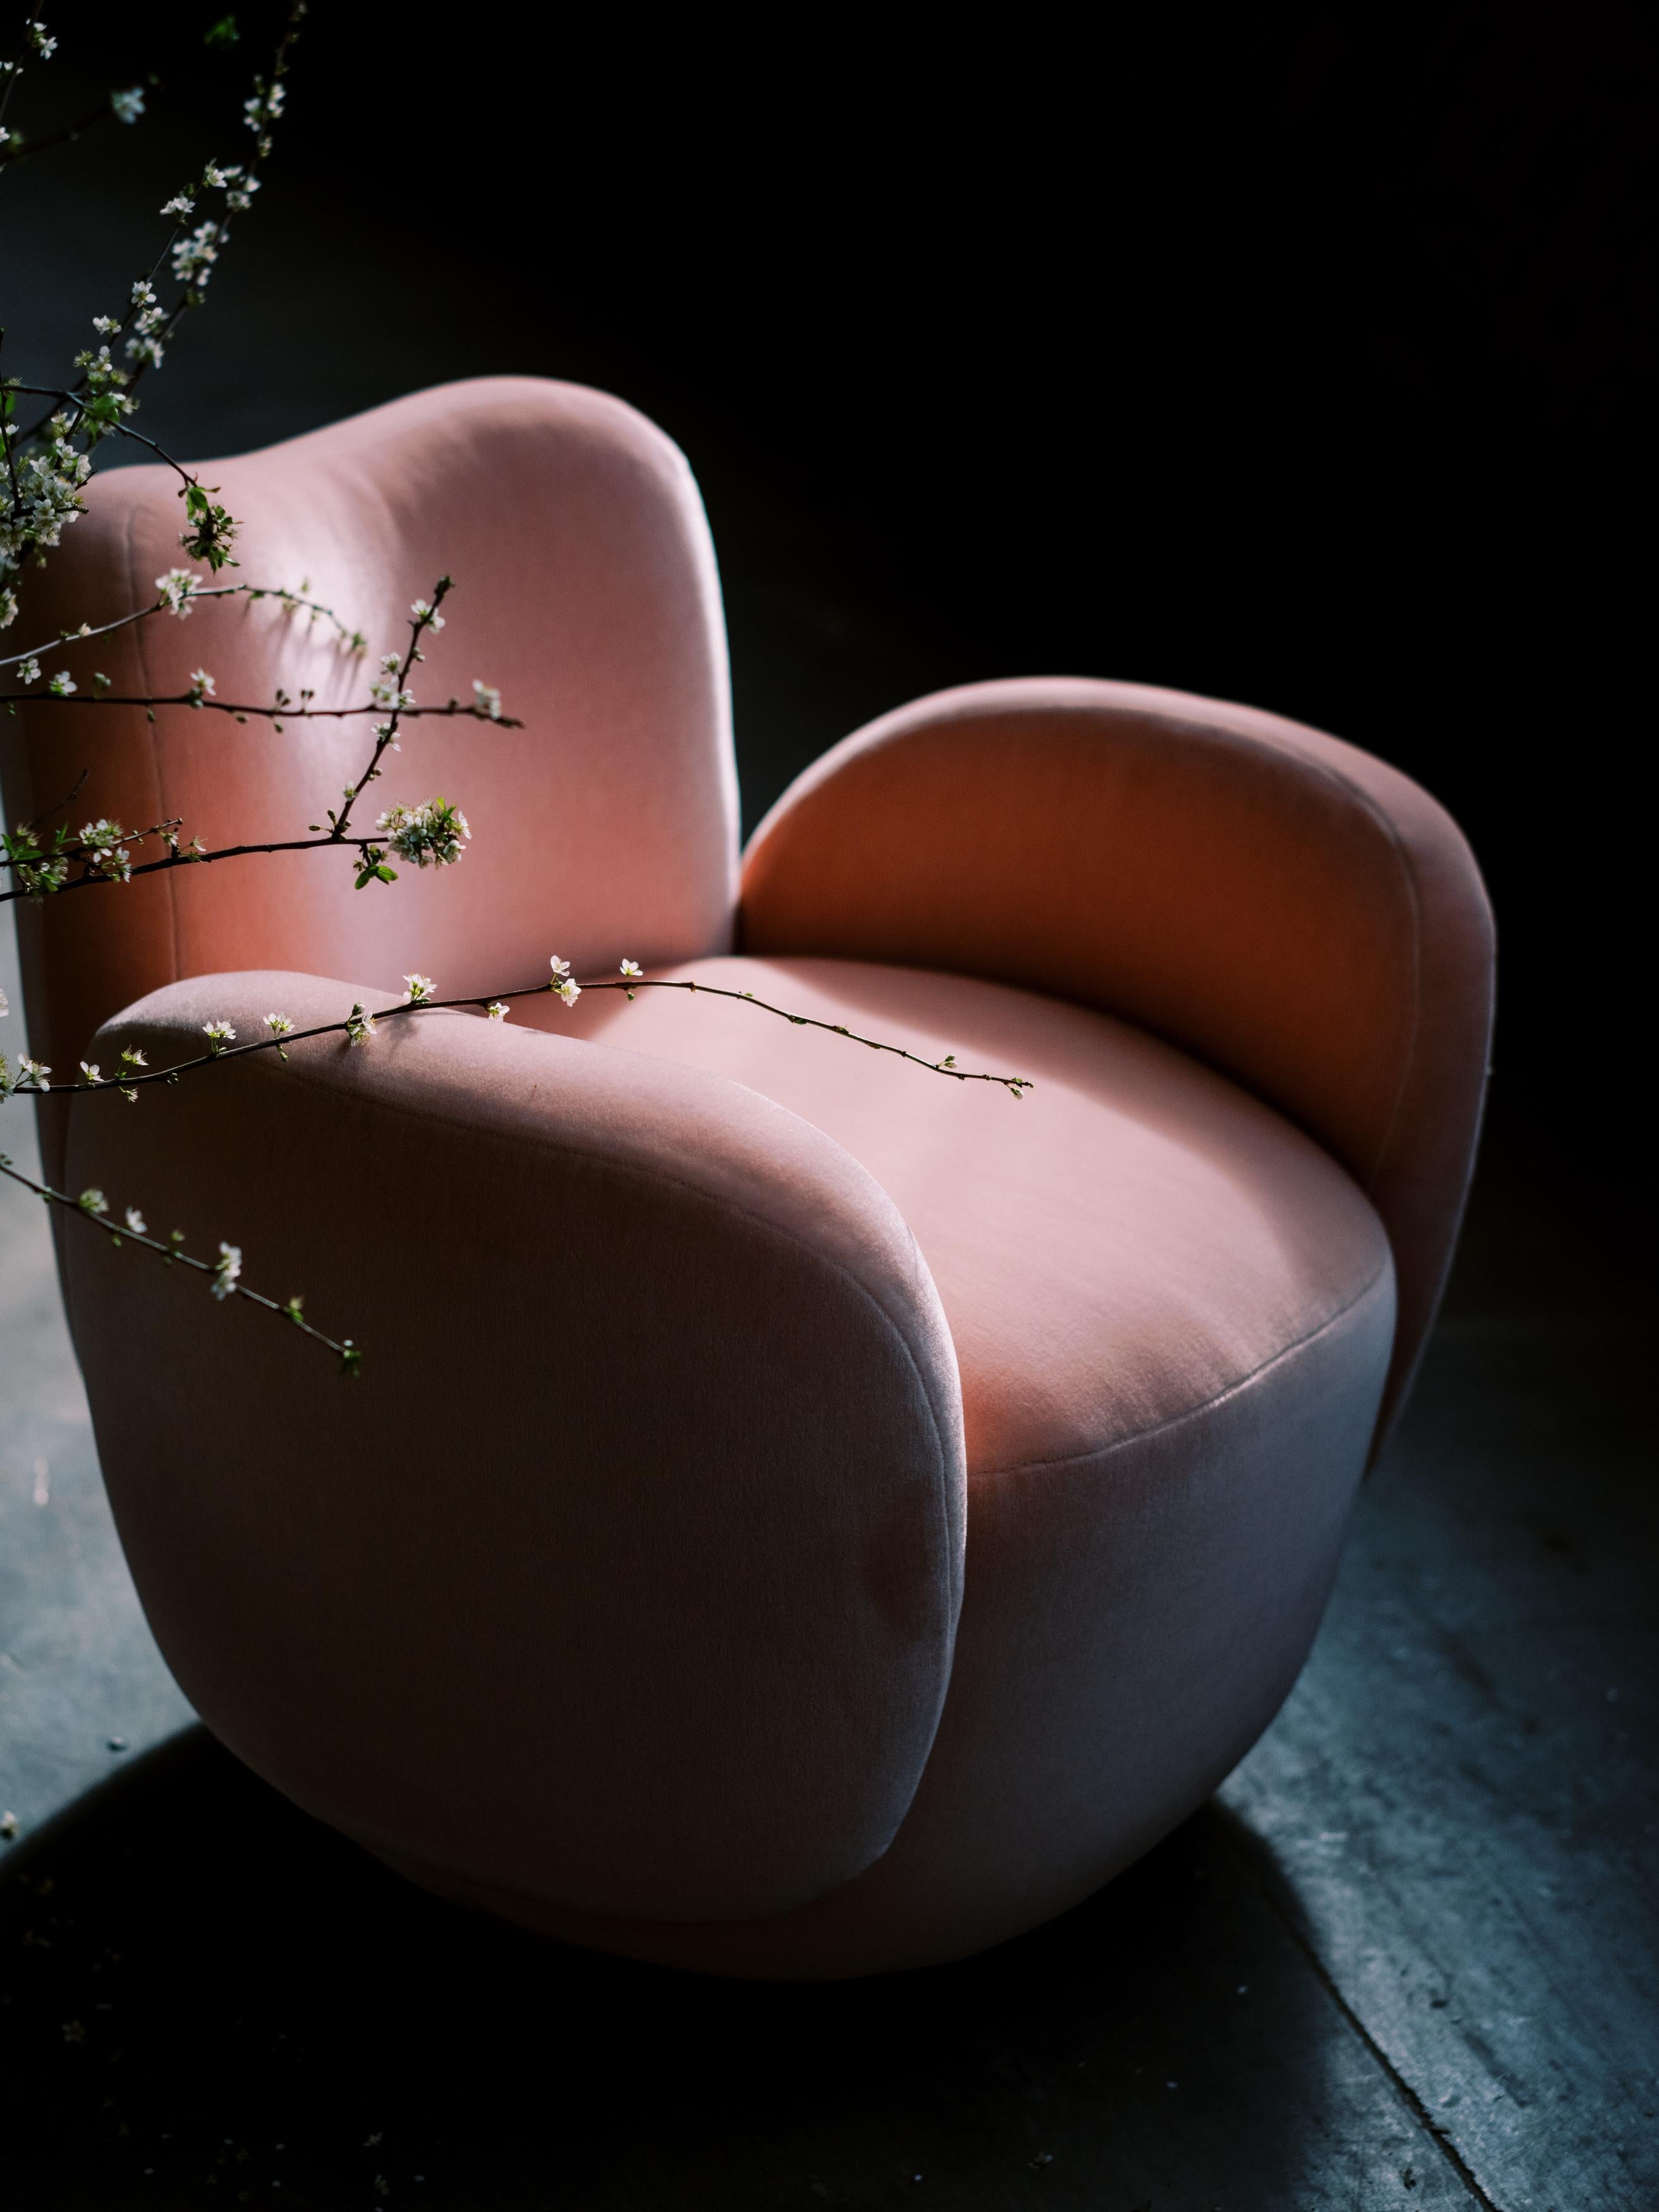 Conchula armchair, Contemporary Collection, Handcrafted in Portugal - Europe by Greenapple.

Designed by Rute Martins for the Contemporary Collection, the Conchula armchair is a room-defining furniture piece with an eye-catching organic silhouette.